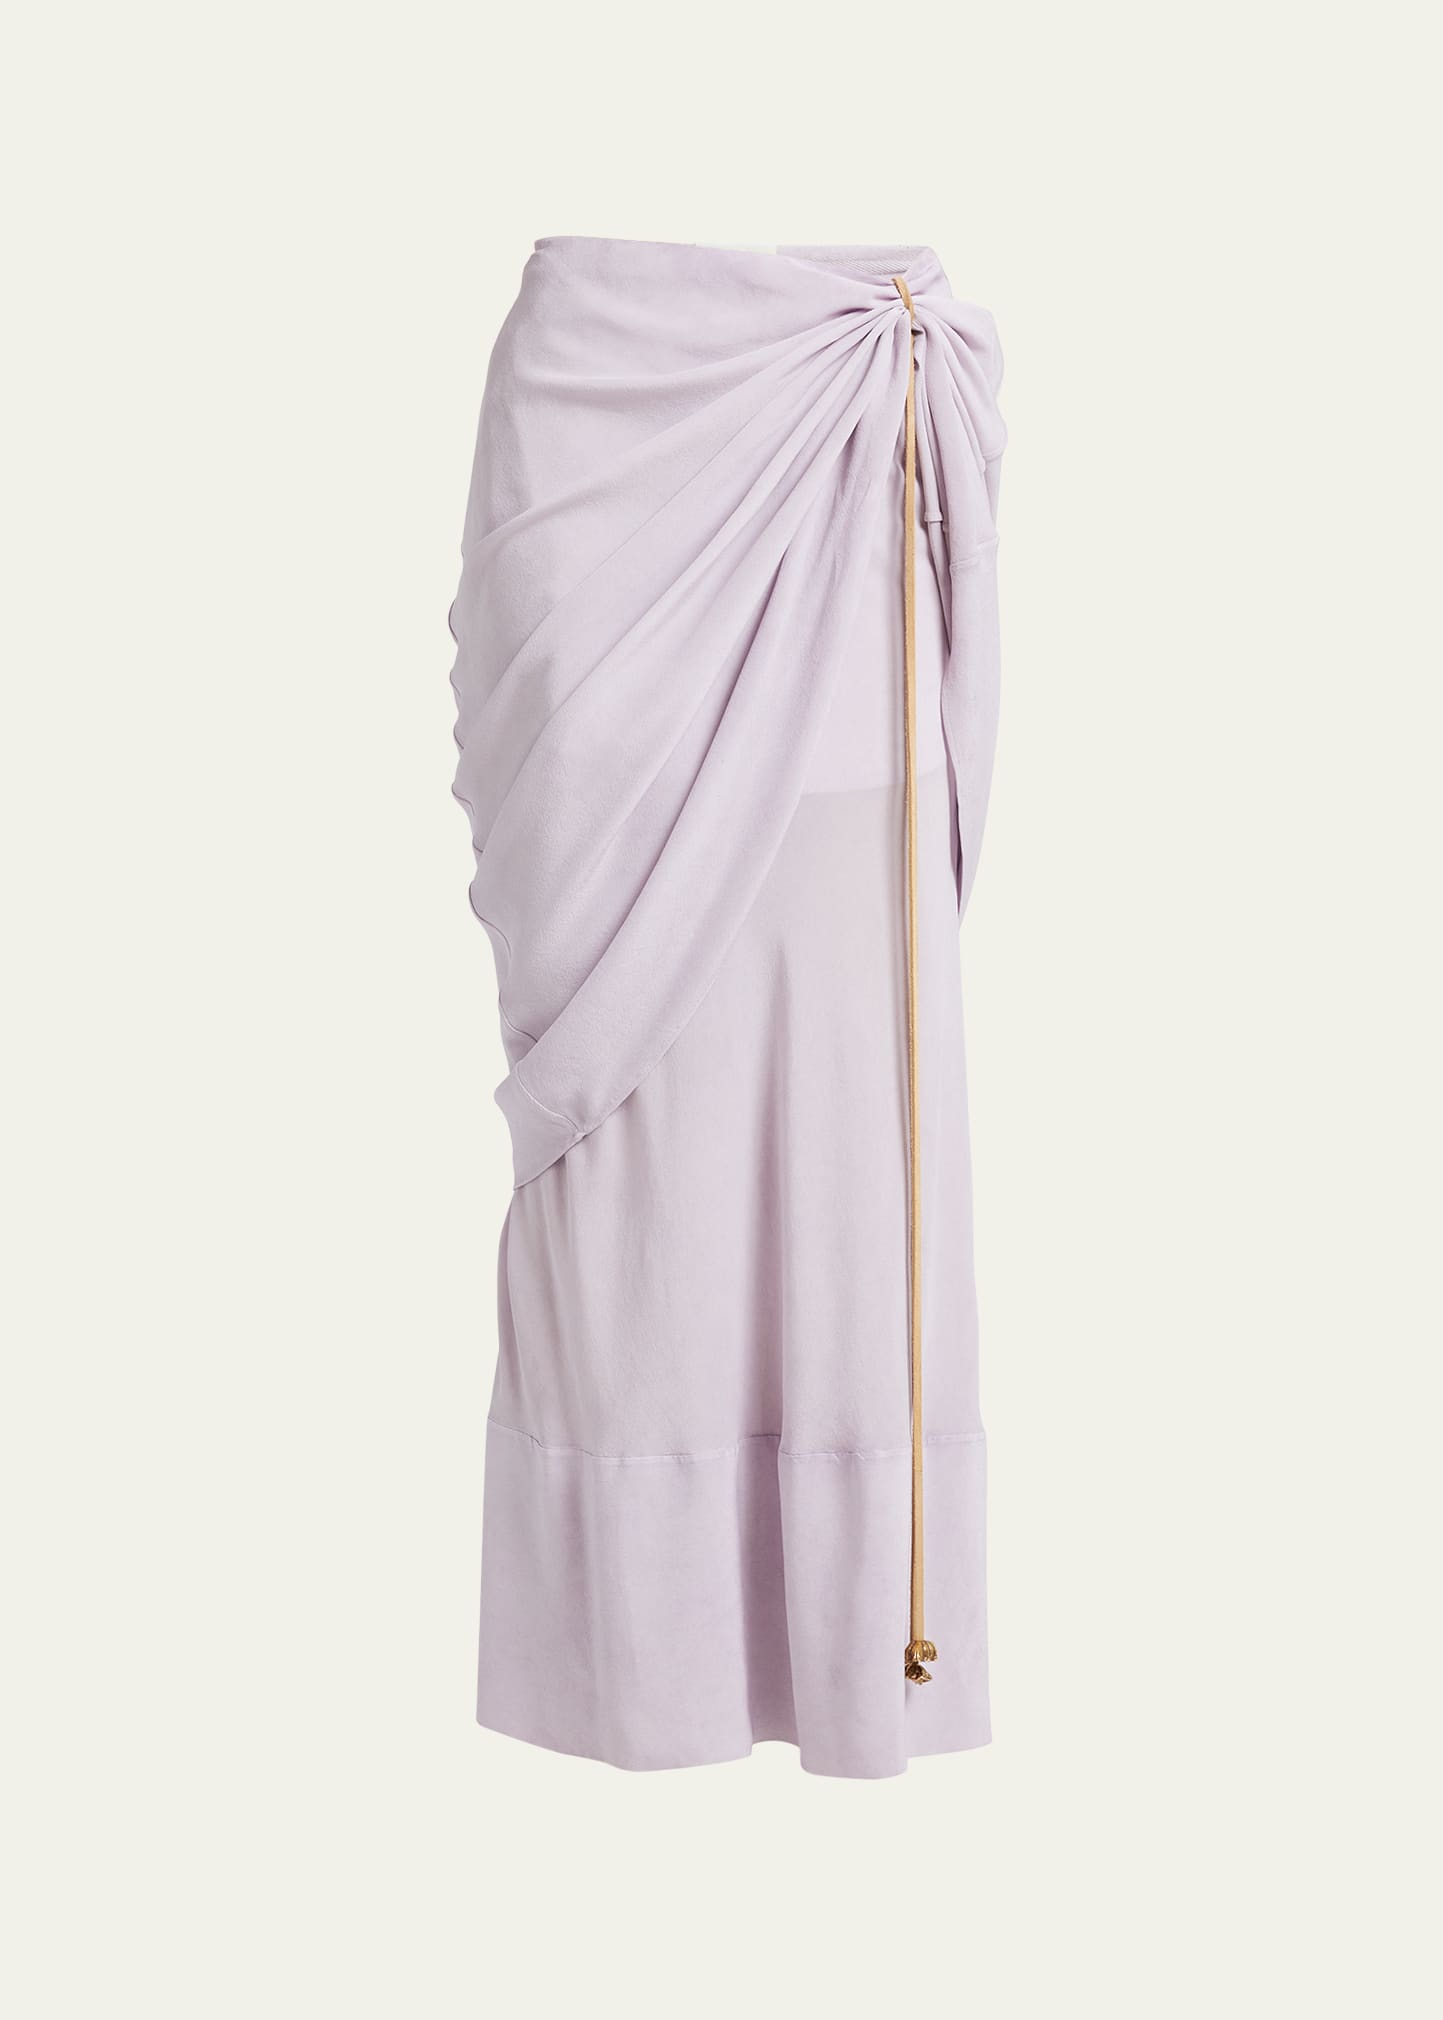 Quira Draped Silk Double Underskirt In Q0075 Misty Lilac